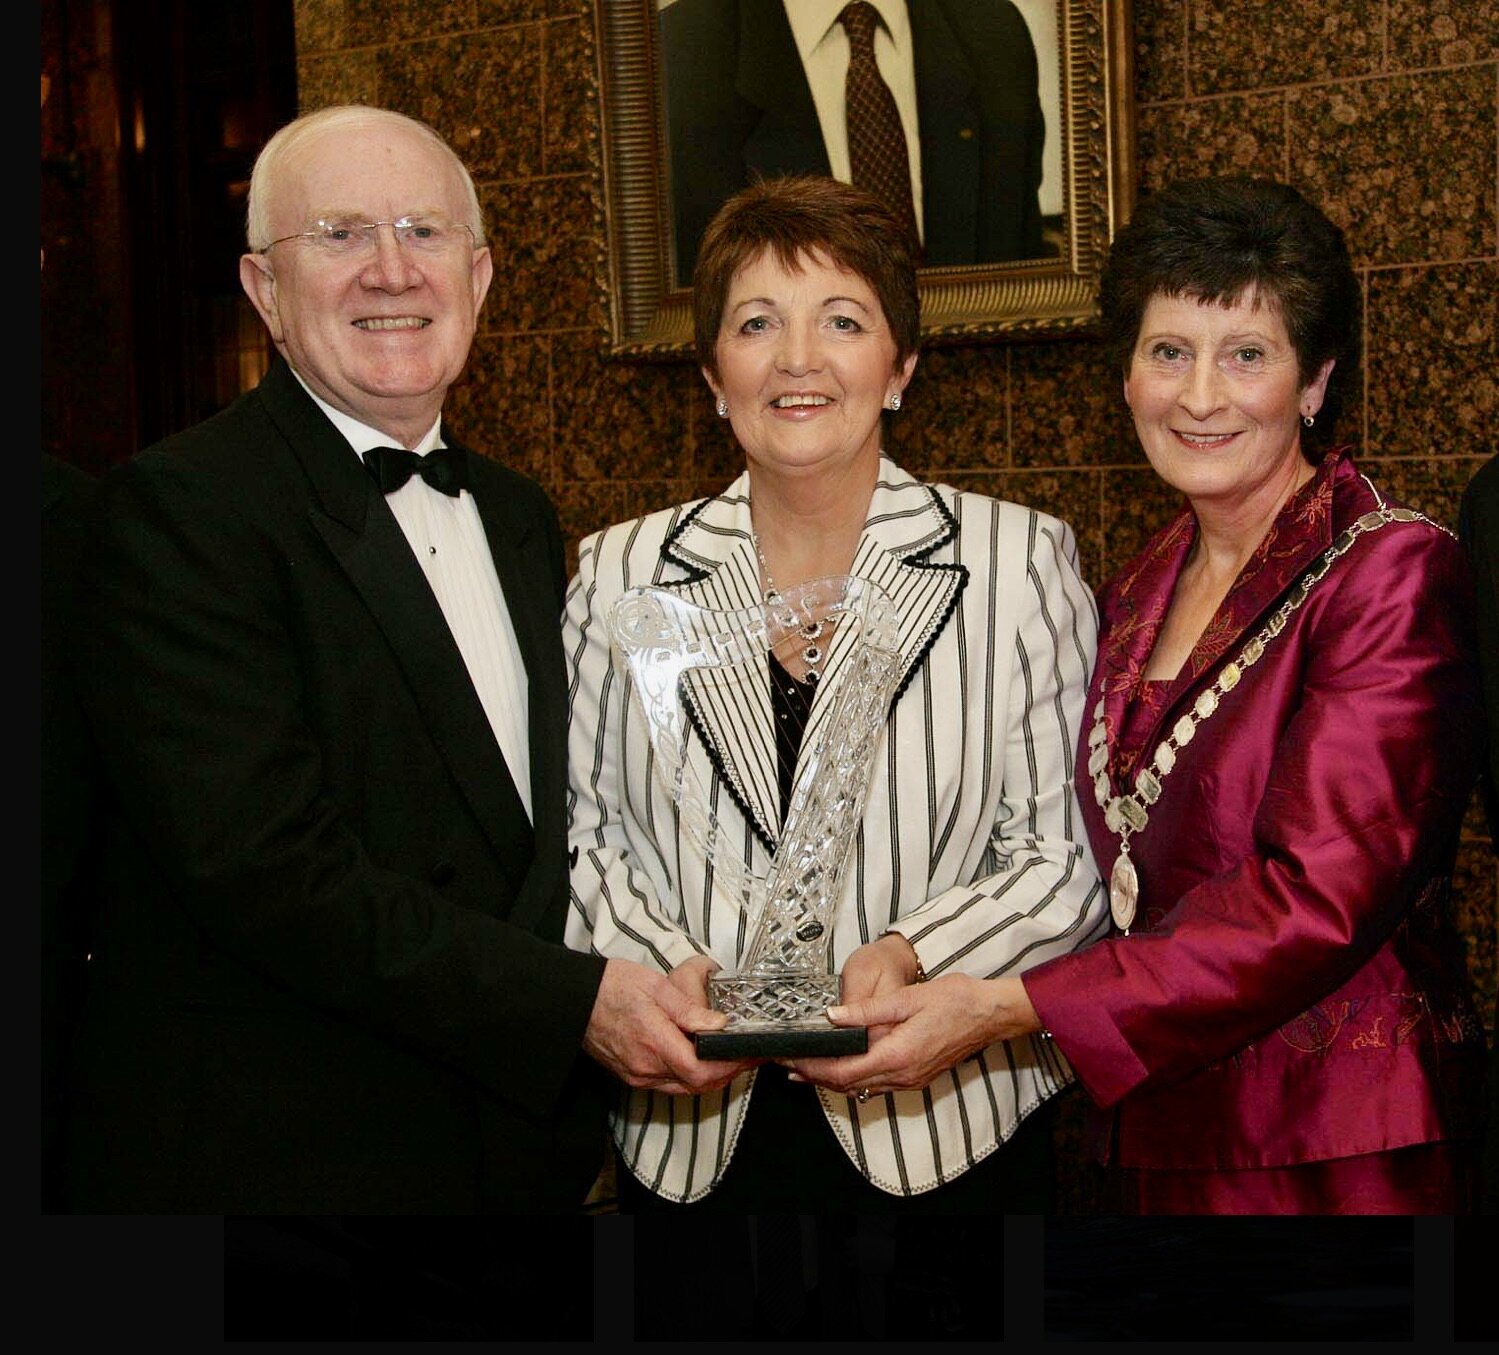 Donegal Person of the Year 2006